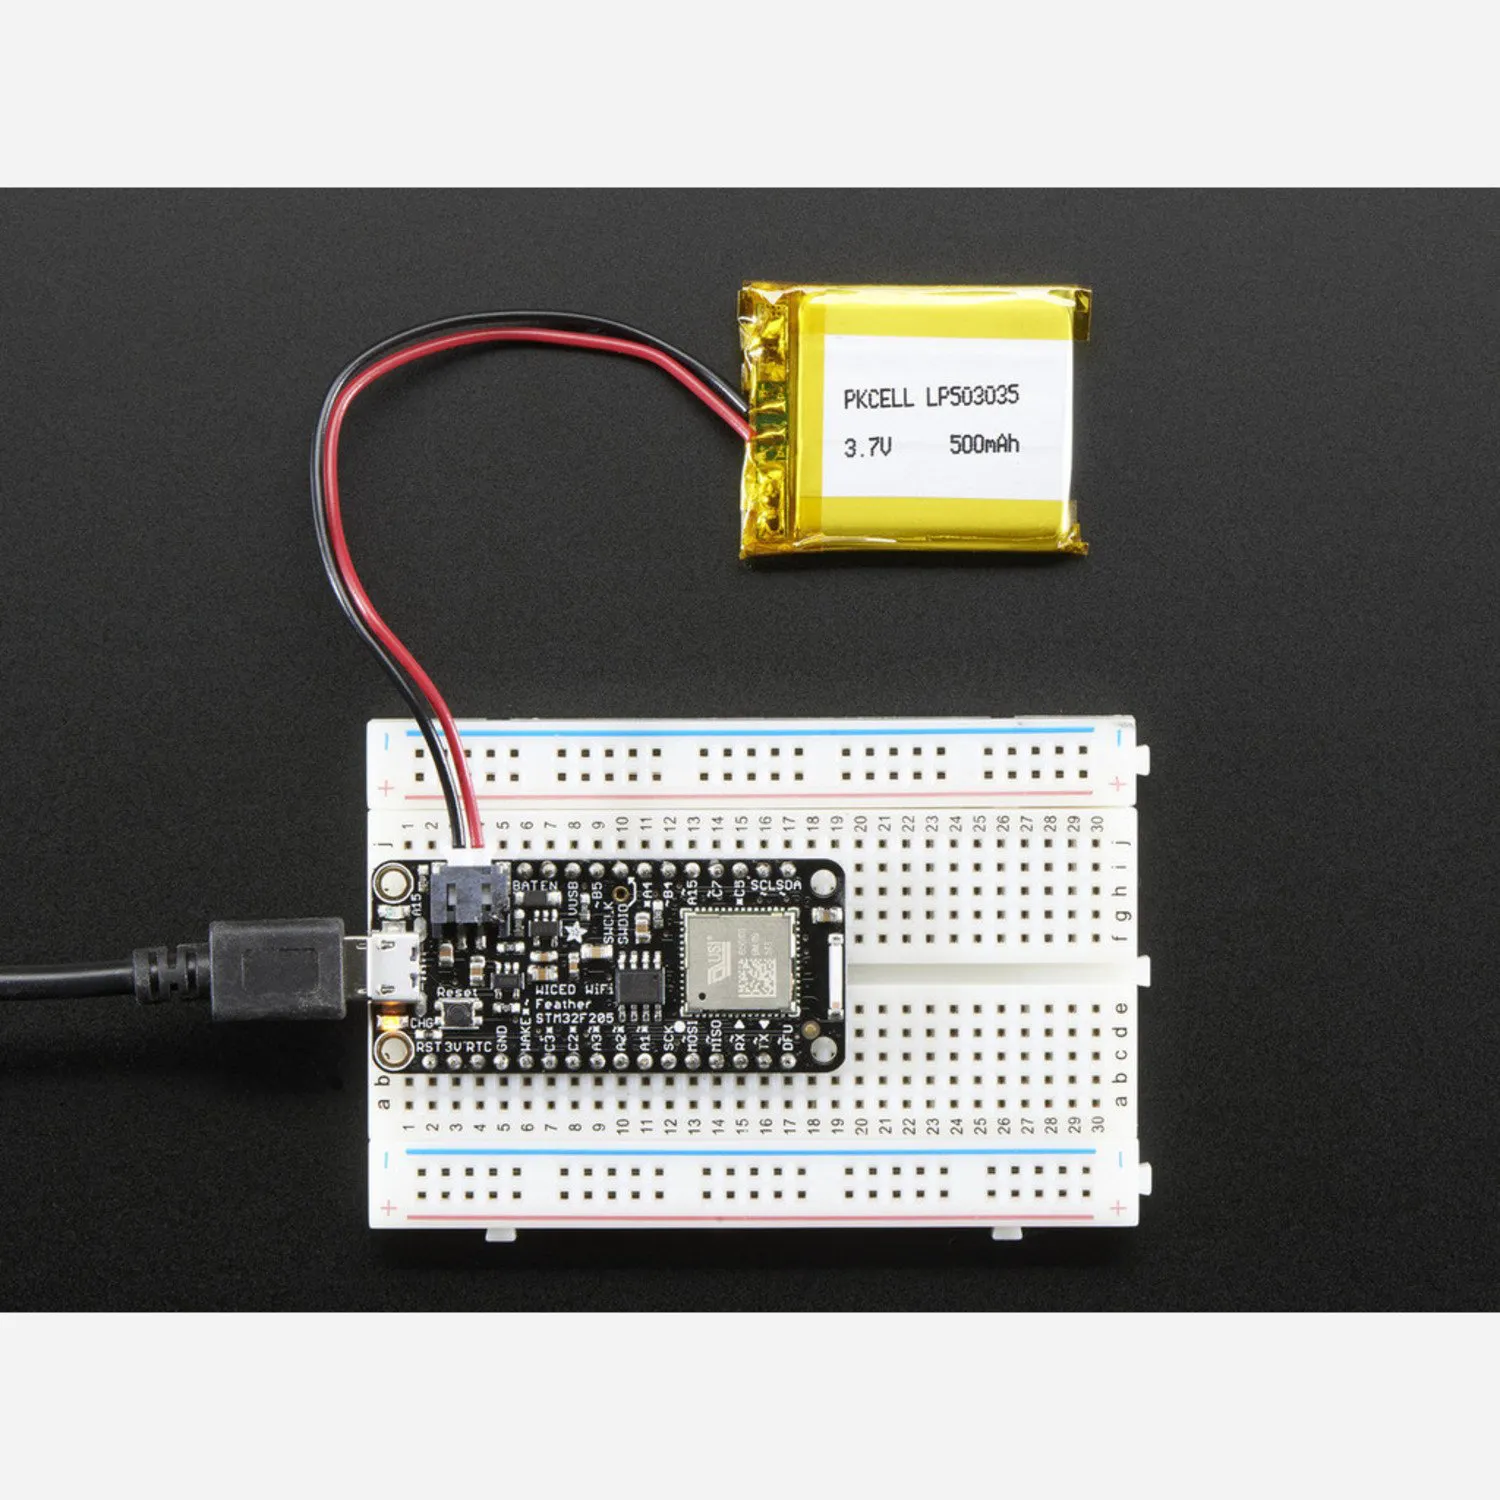 Photo of Adafruit WICED WiFi Feather - STM32F205 with Cypress WICED WiFi